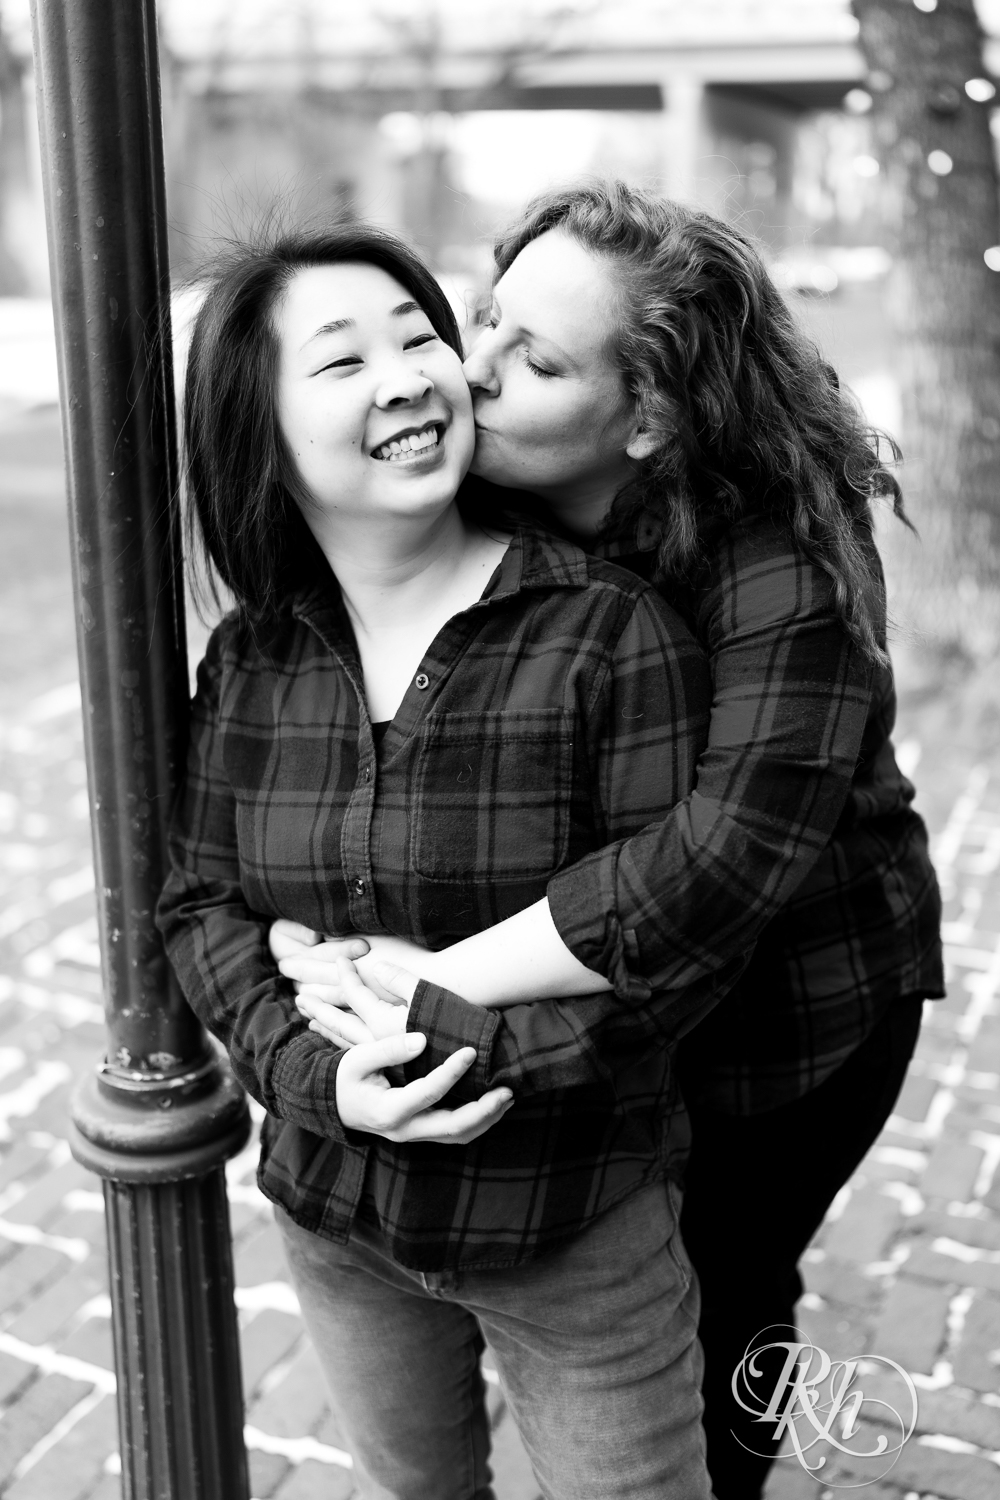 Red headed woman and Asian woman in red flannels kiss during winter engagement photography in Minneapolis, Minnesota.